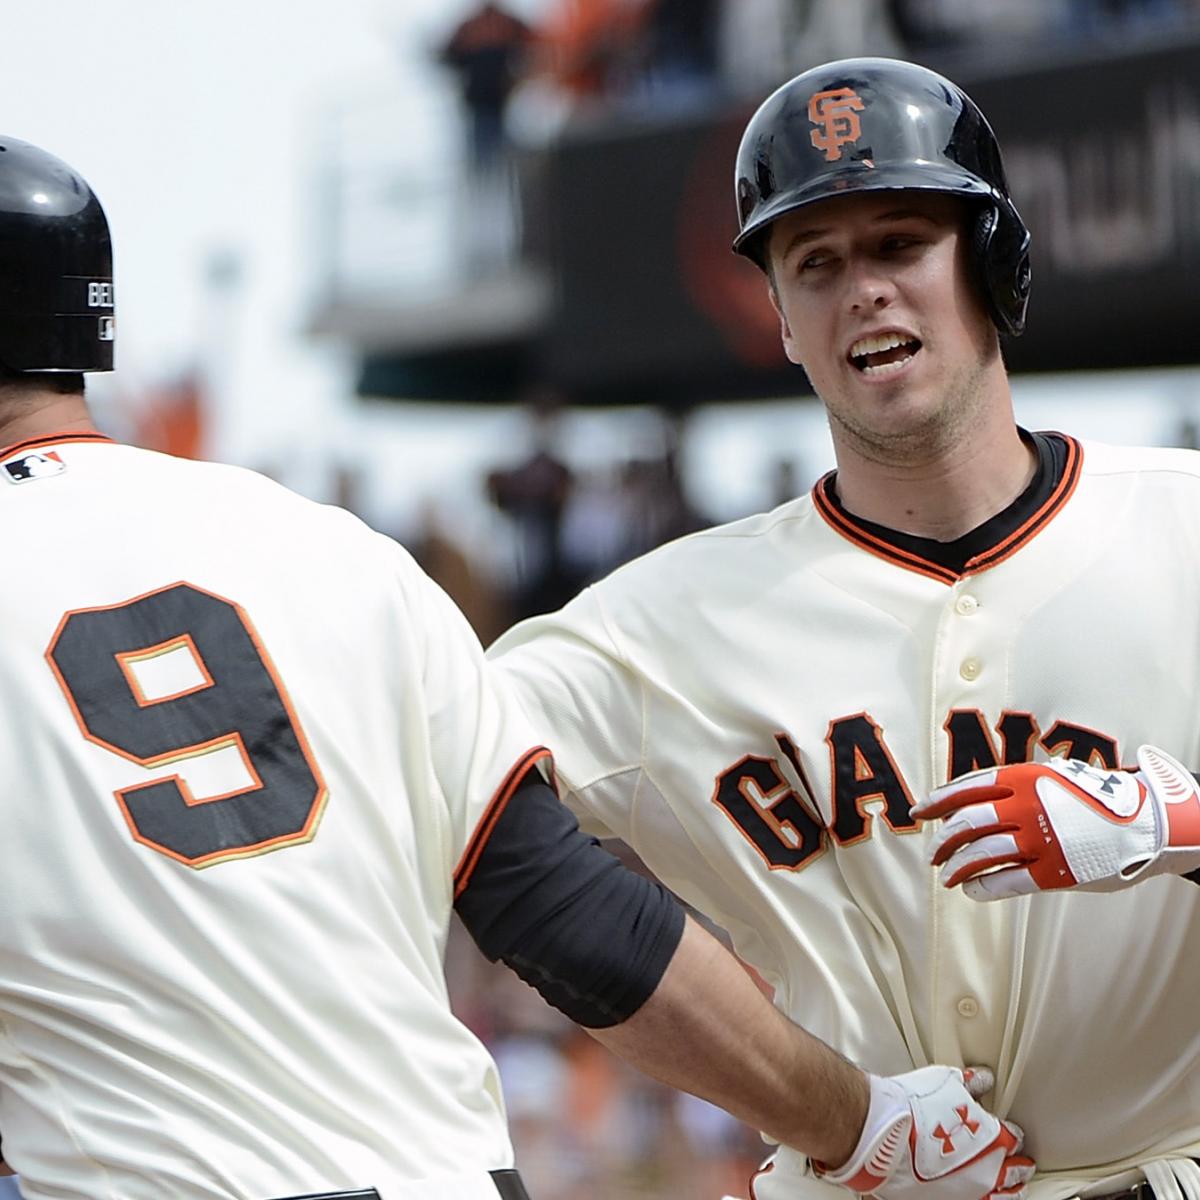 San Francisco Giants AllStar Results Prove They Have the MLB's Best